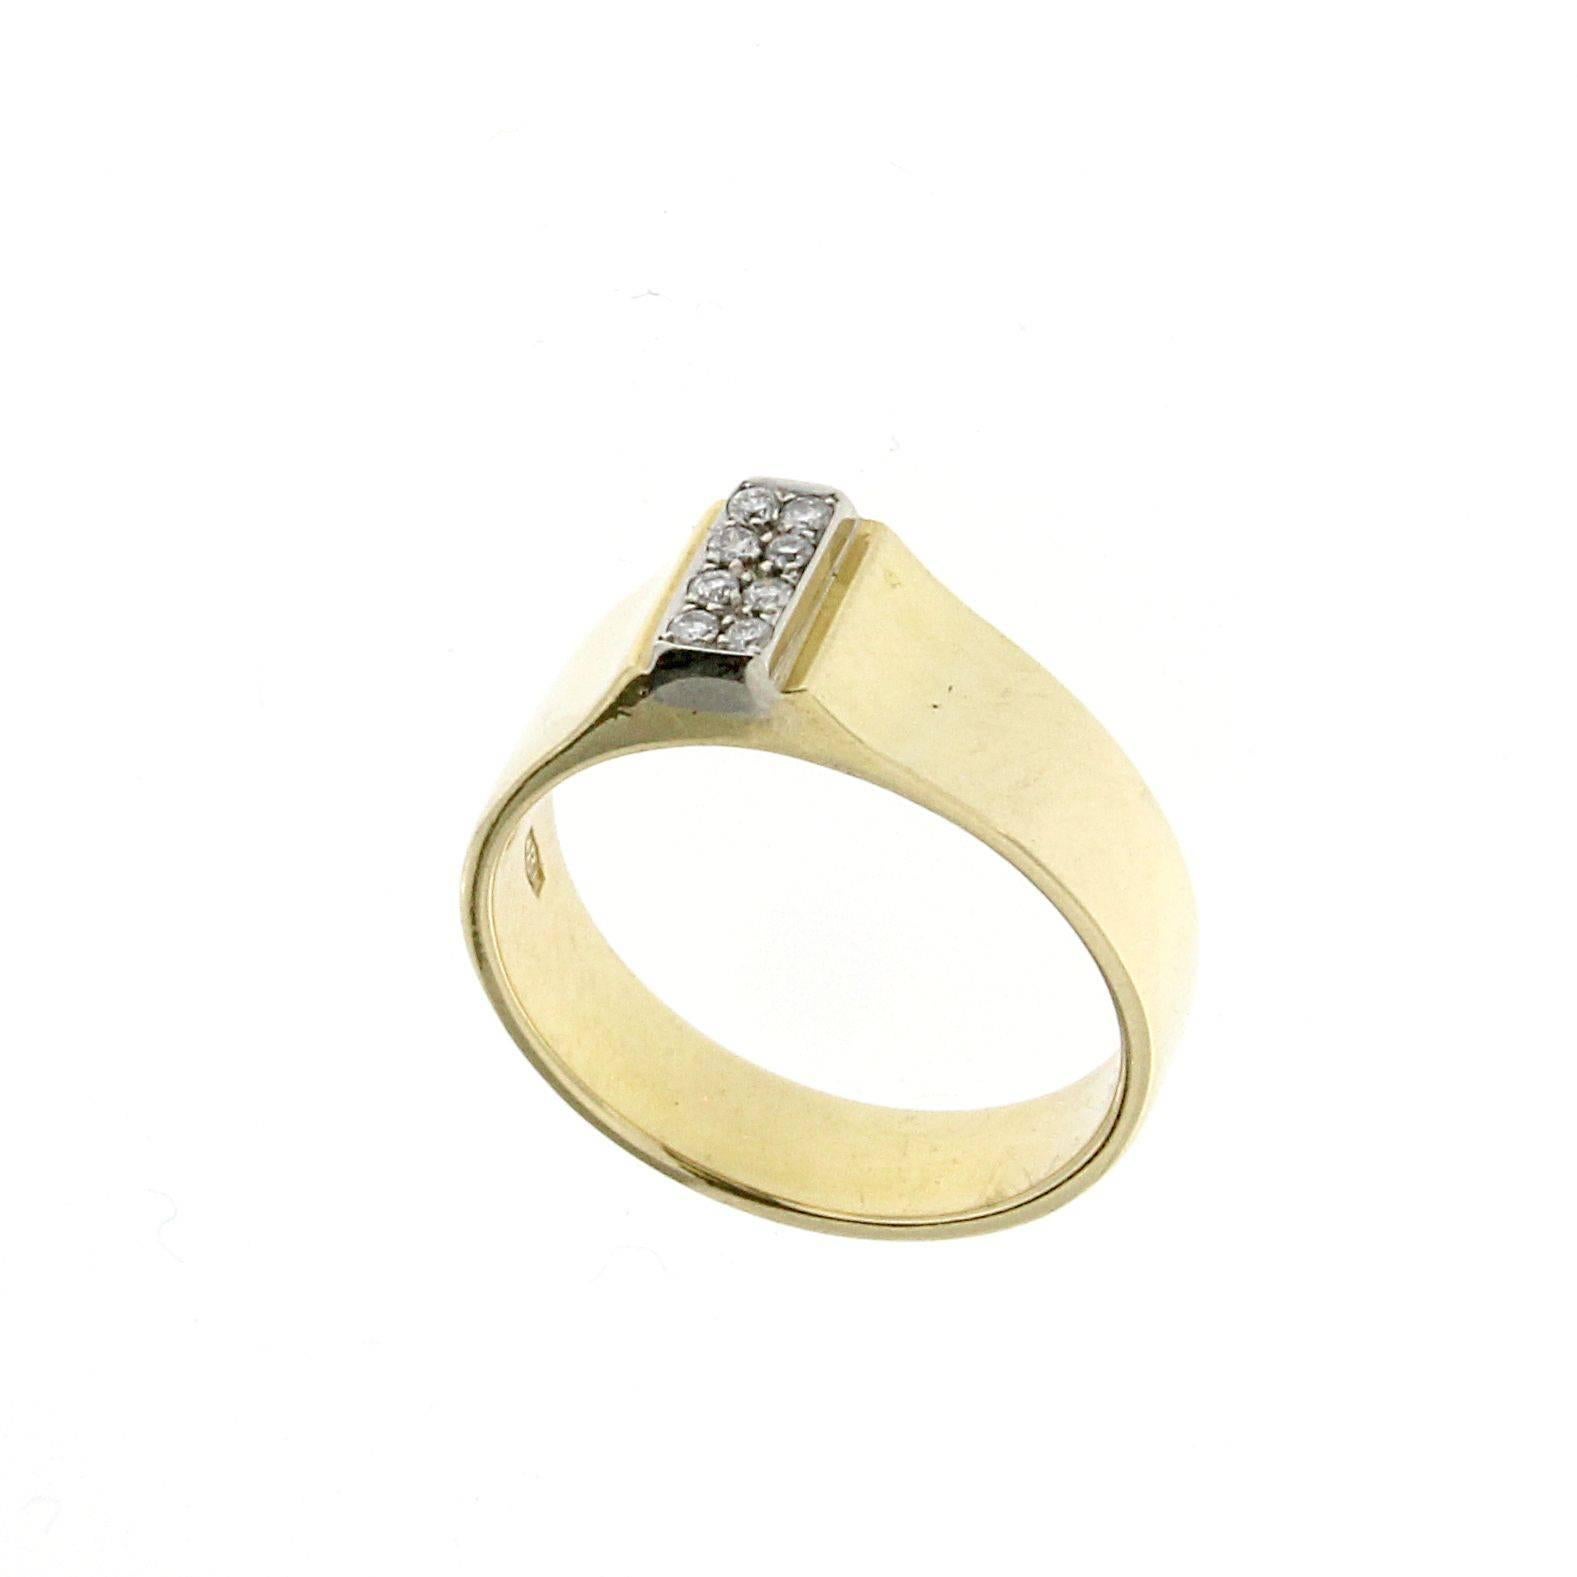 18kt yellow and white gold ring set with diamonds of refined workmanship were embedded
Very rigorous design and clean lines
8 White ESO Diamonds total of CT 0.10
Gold weight 18 kt gr 8.50
Stamp 750